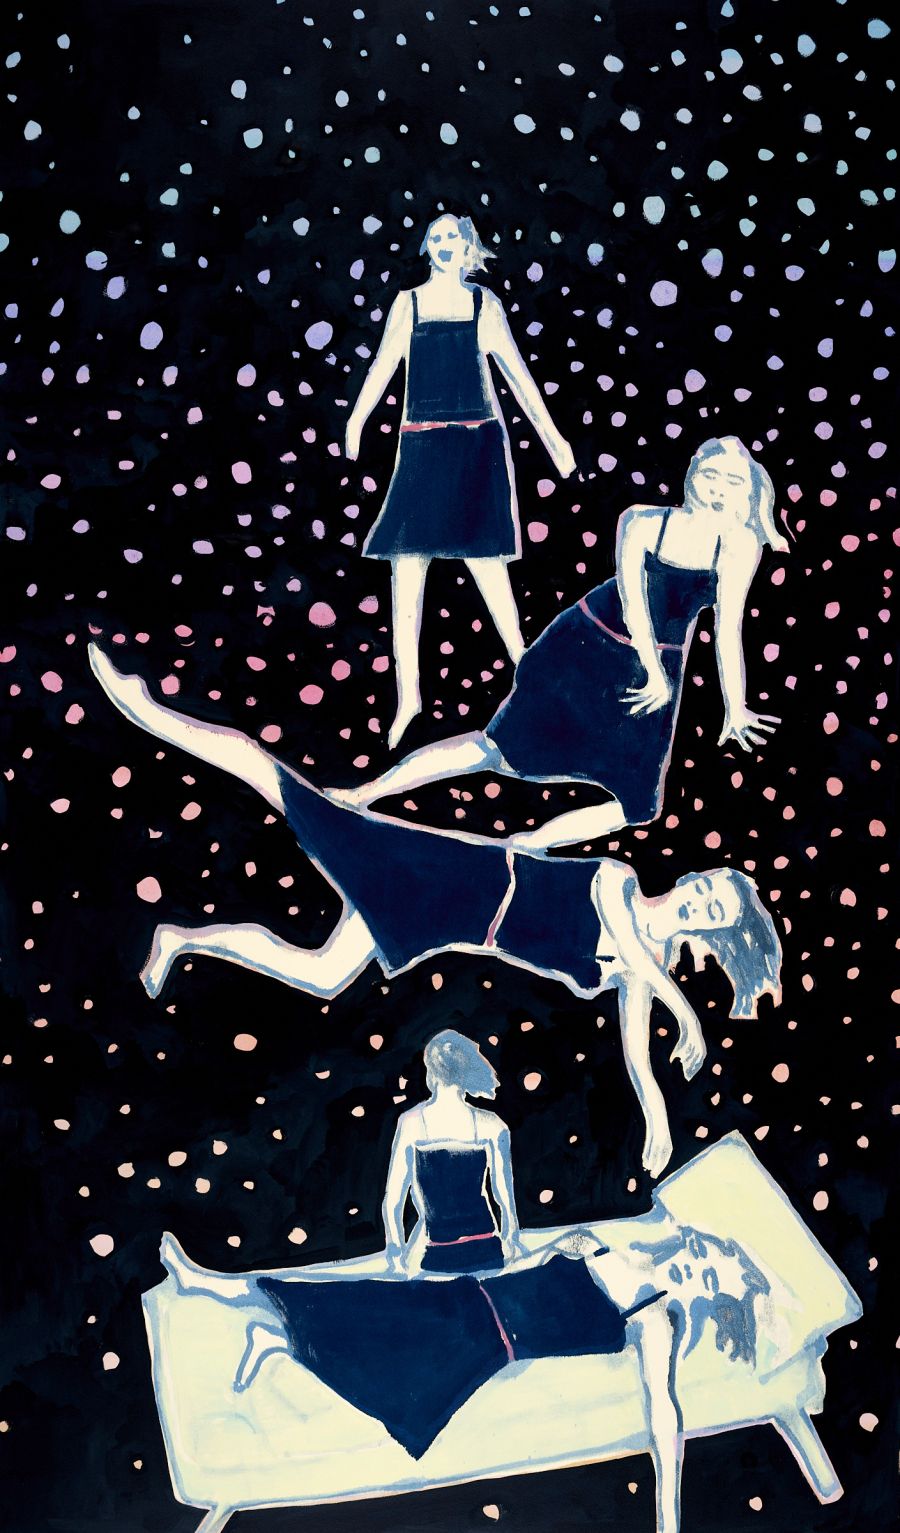 female figures ascending from the stars onto a bed.